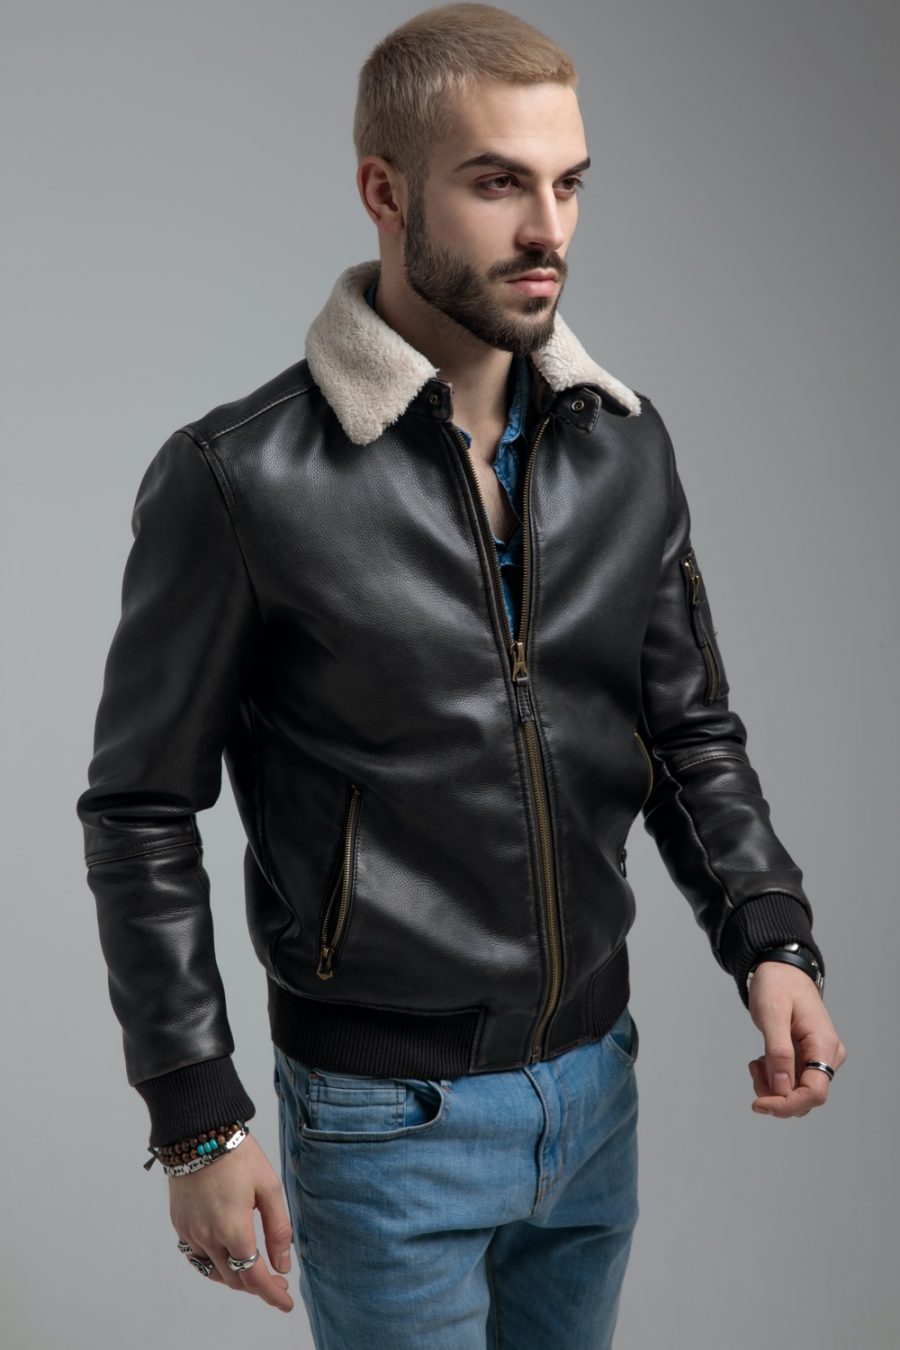 Top Tips to Buy Your First Leather Jacket Online | The Fashionisto